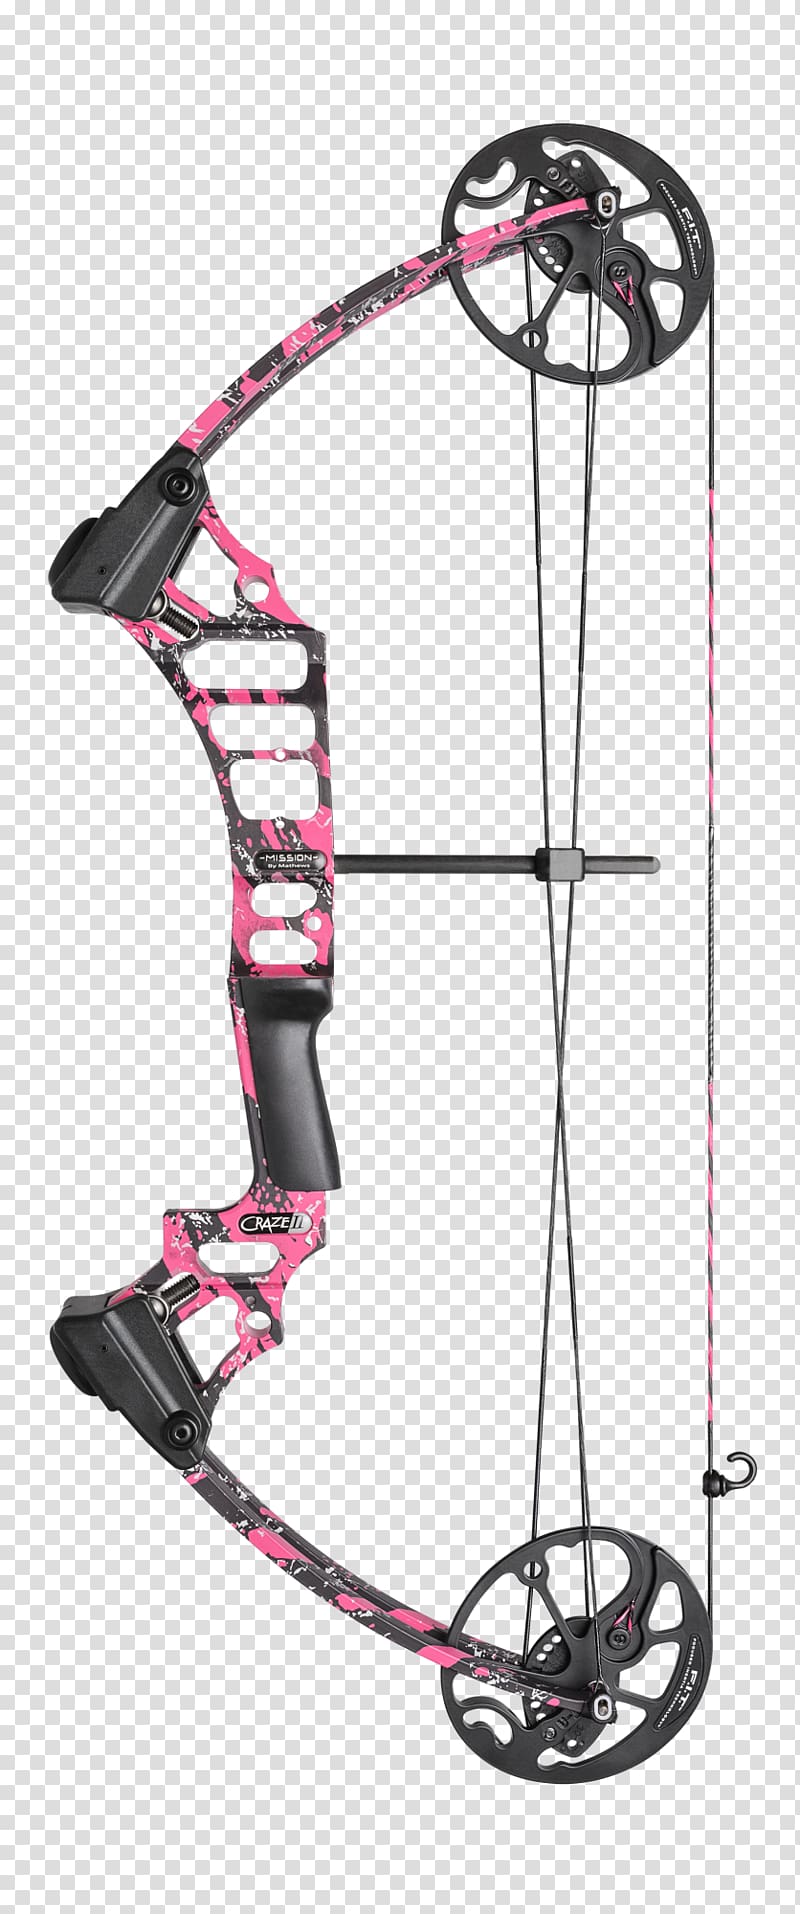 Archery Compound Bows Hunting Bow and arrow, Arrow pink transparent background PNG clipart